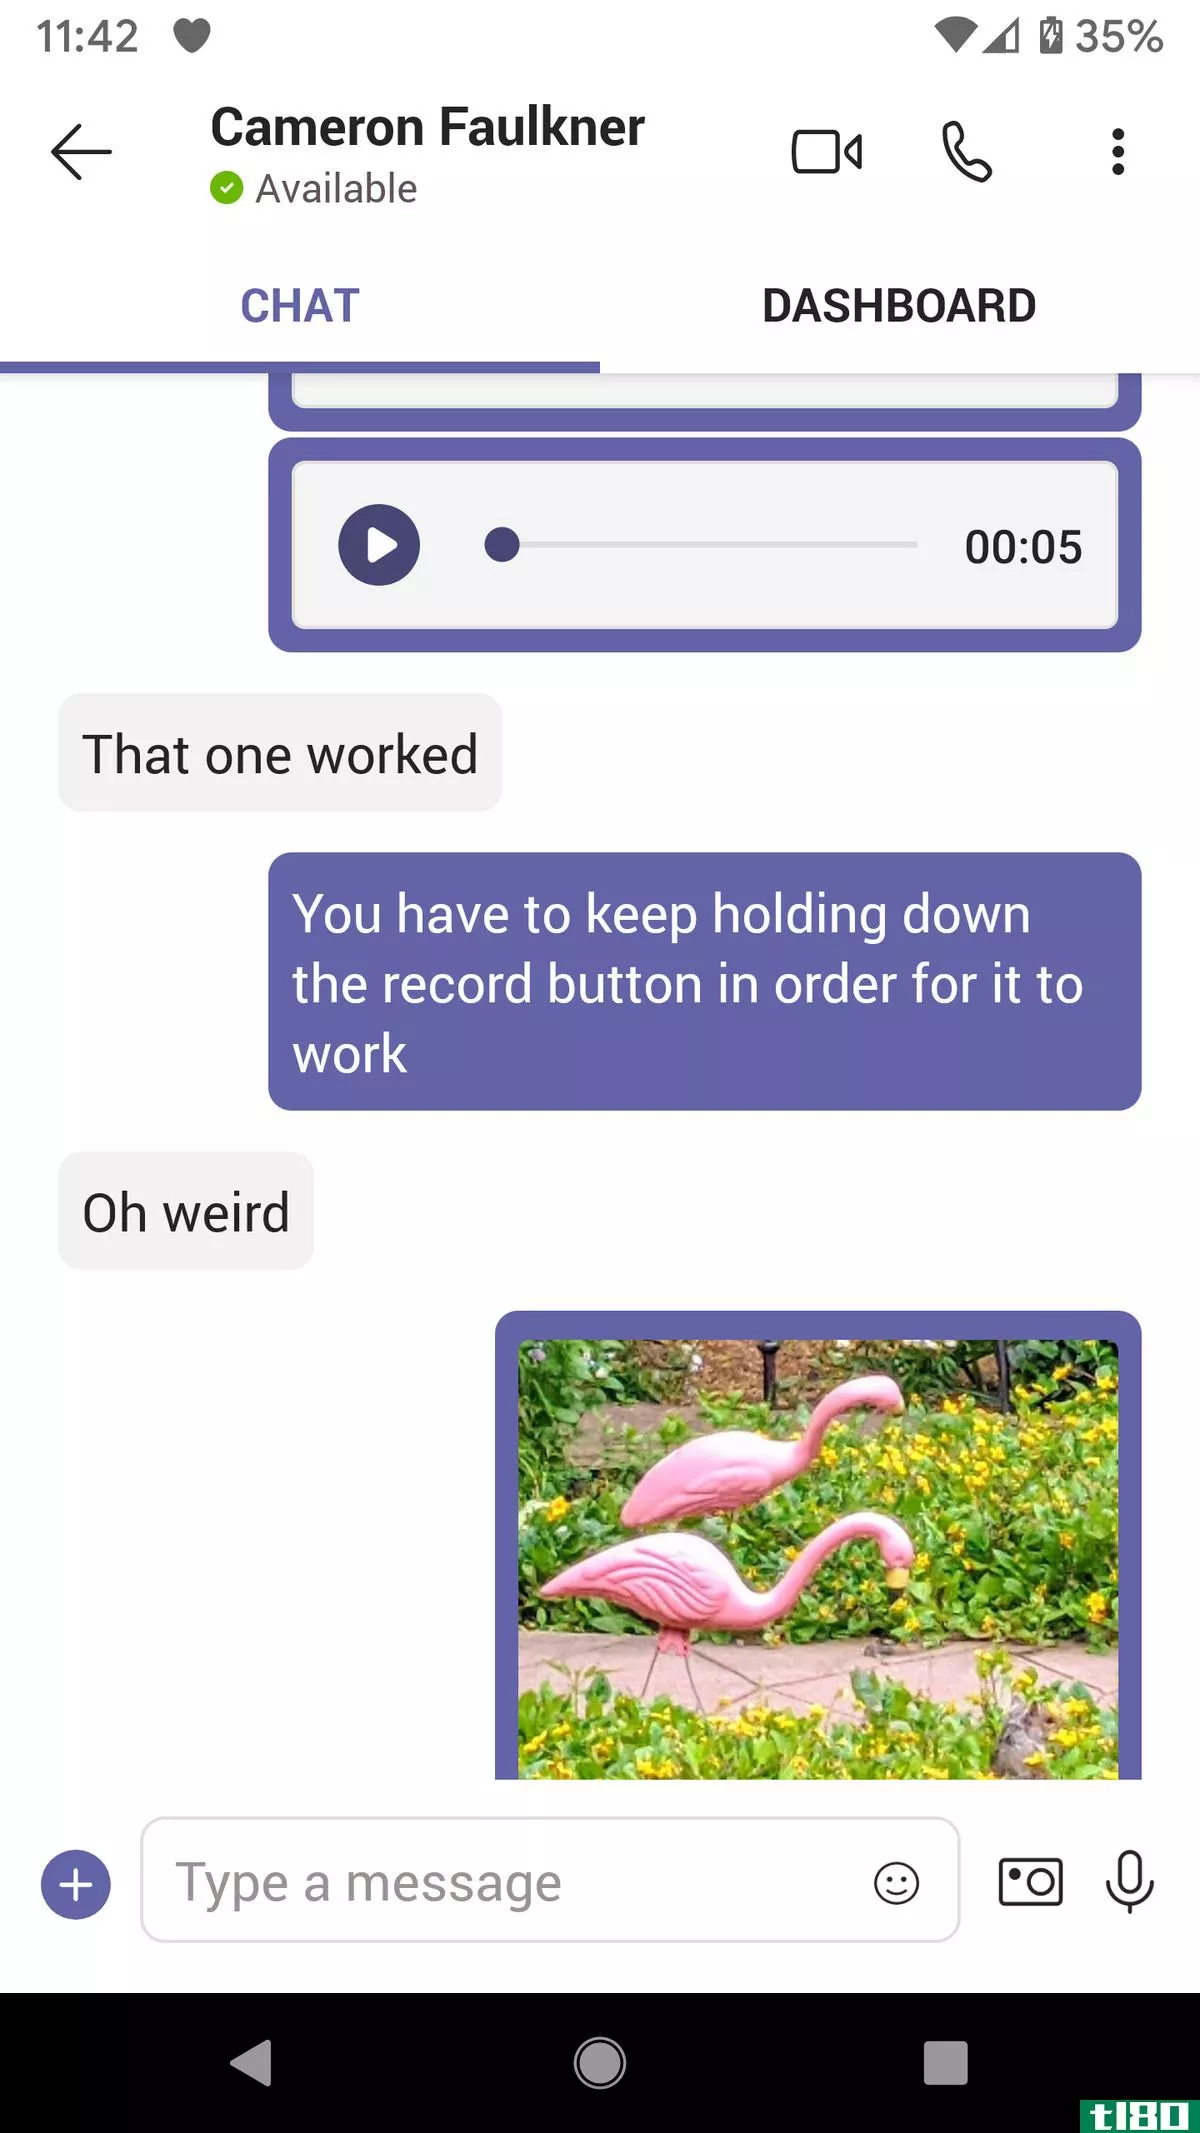 Chats can include text, photos and audio.